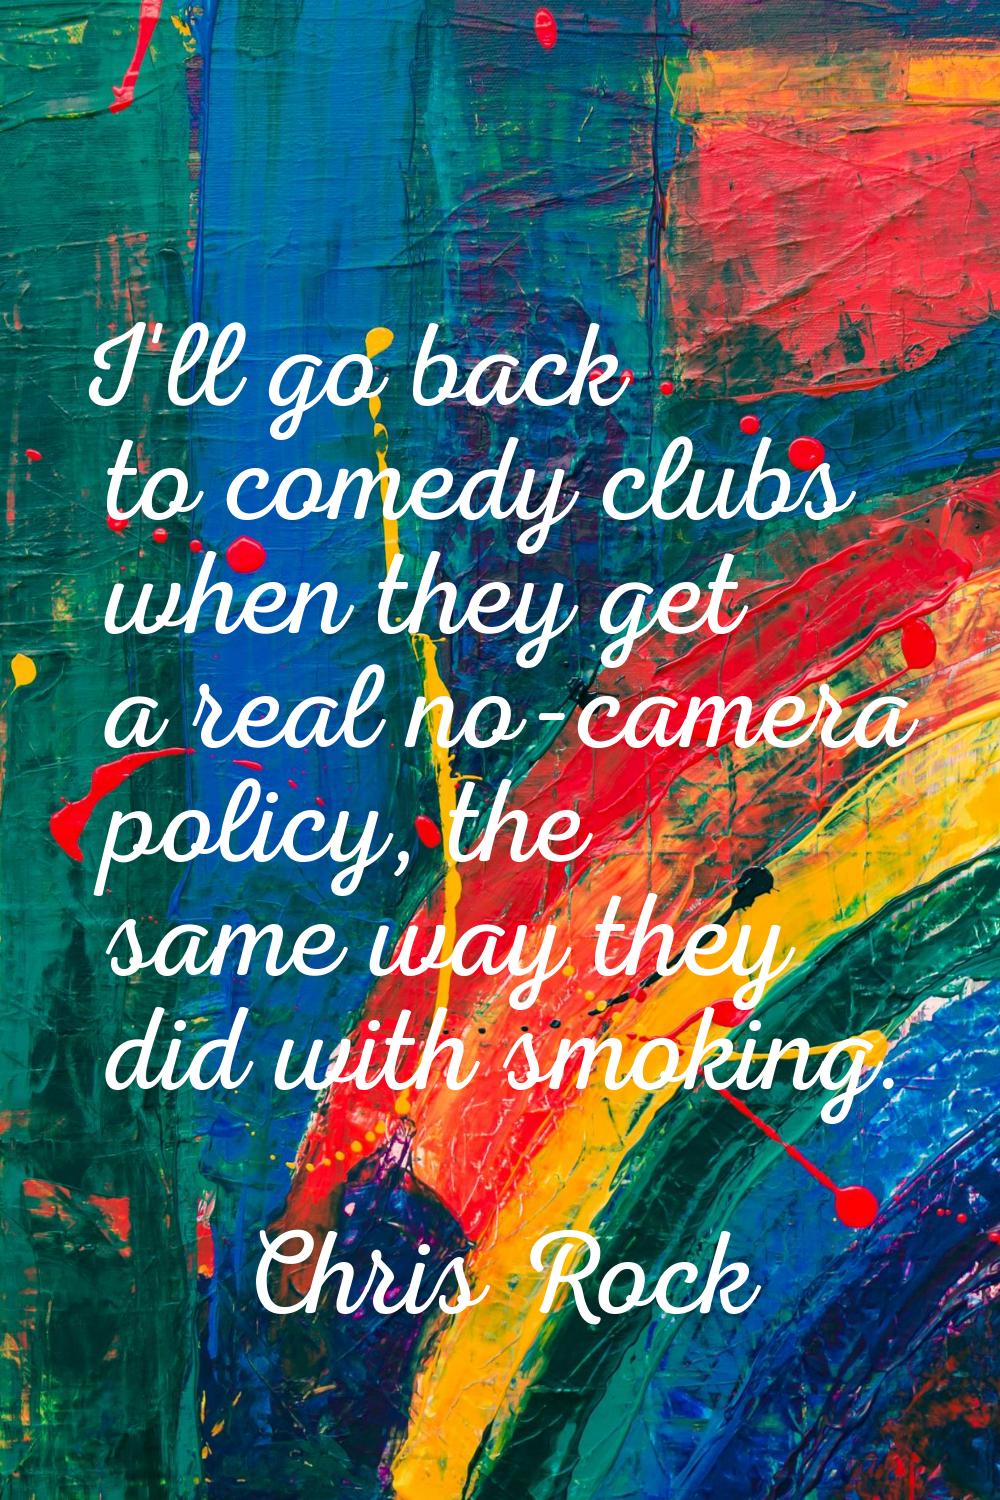 I'll go back to comedy clubs when they get a real no-camera policy, the same way they did with smok